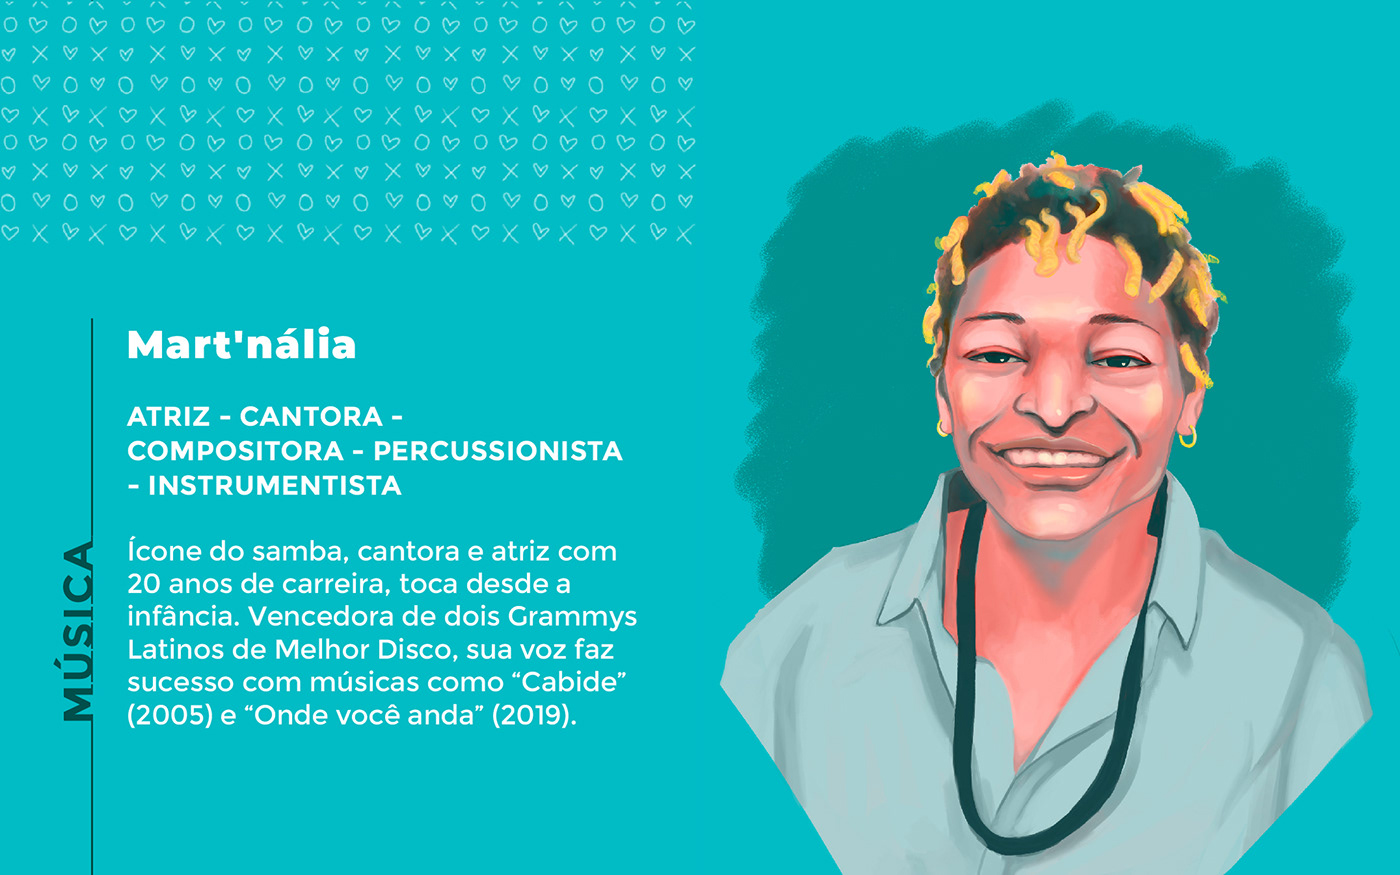 An illustrated portrait of Mart'nália, a brazilian actress, singer and songwriter.